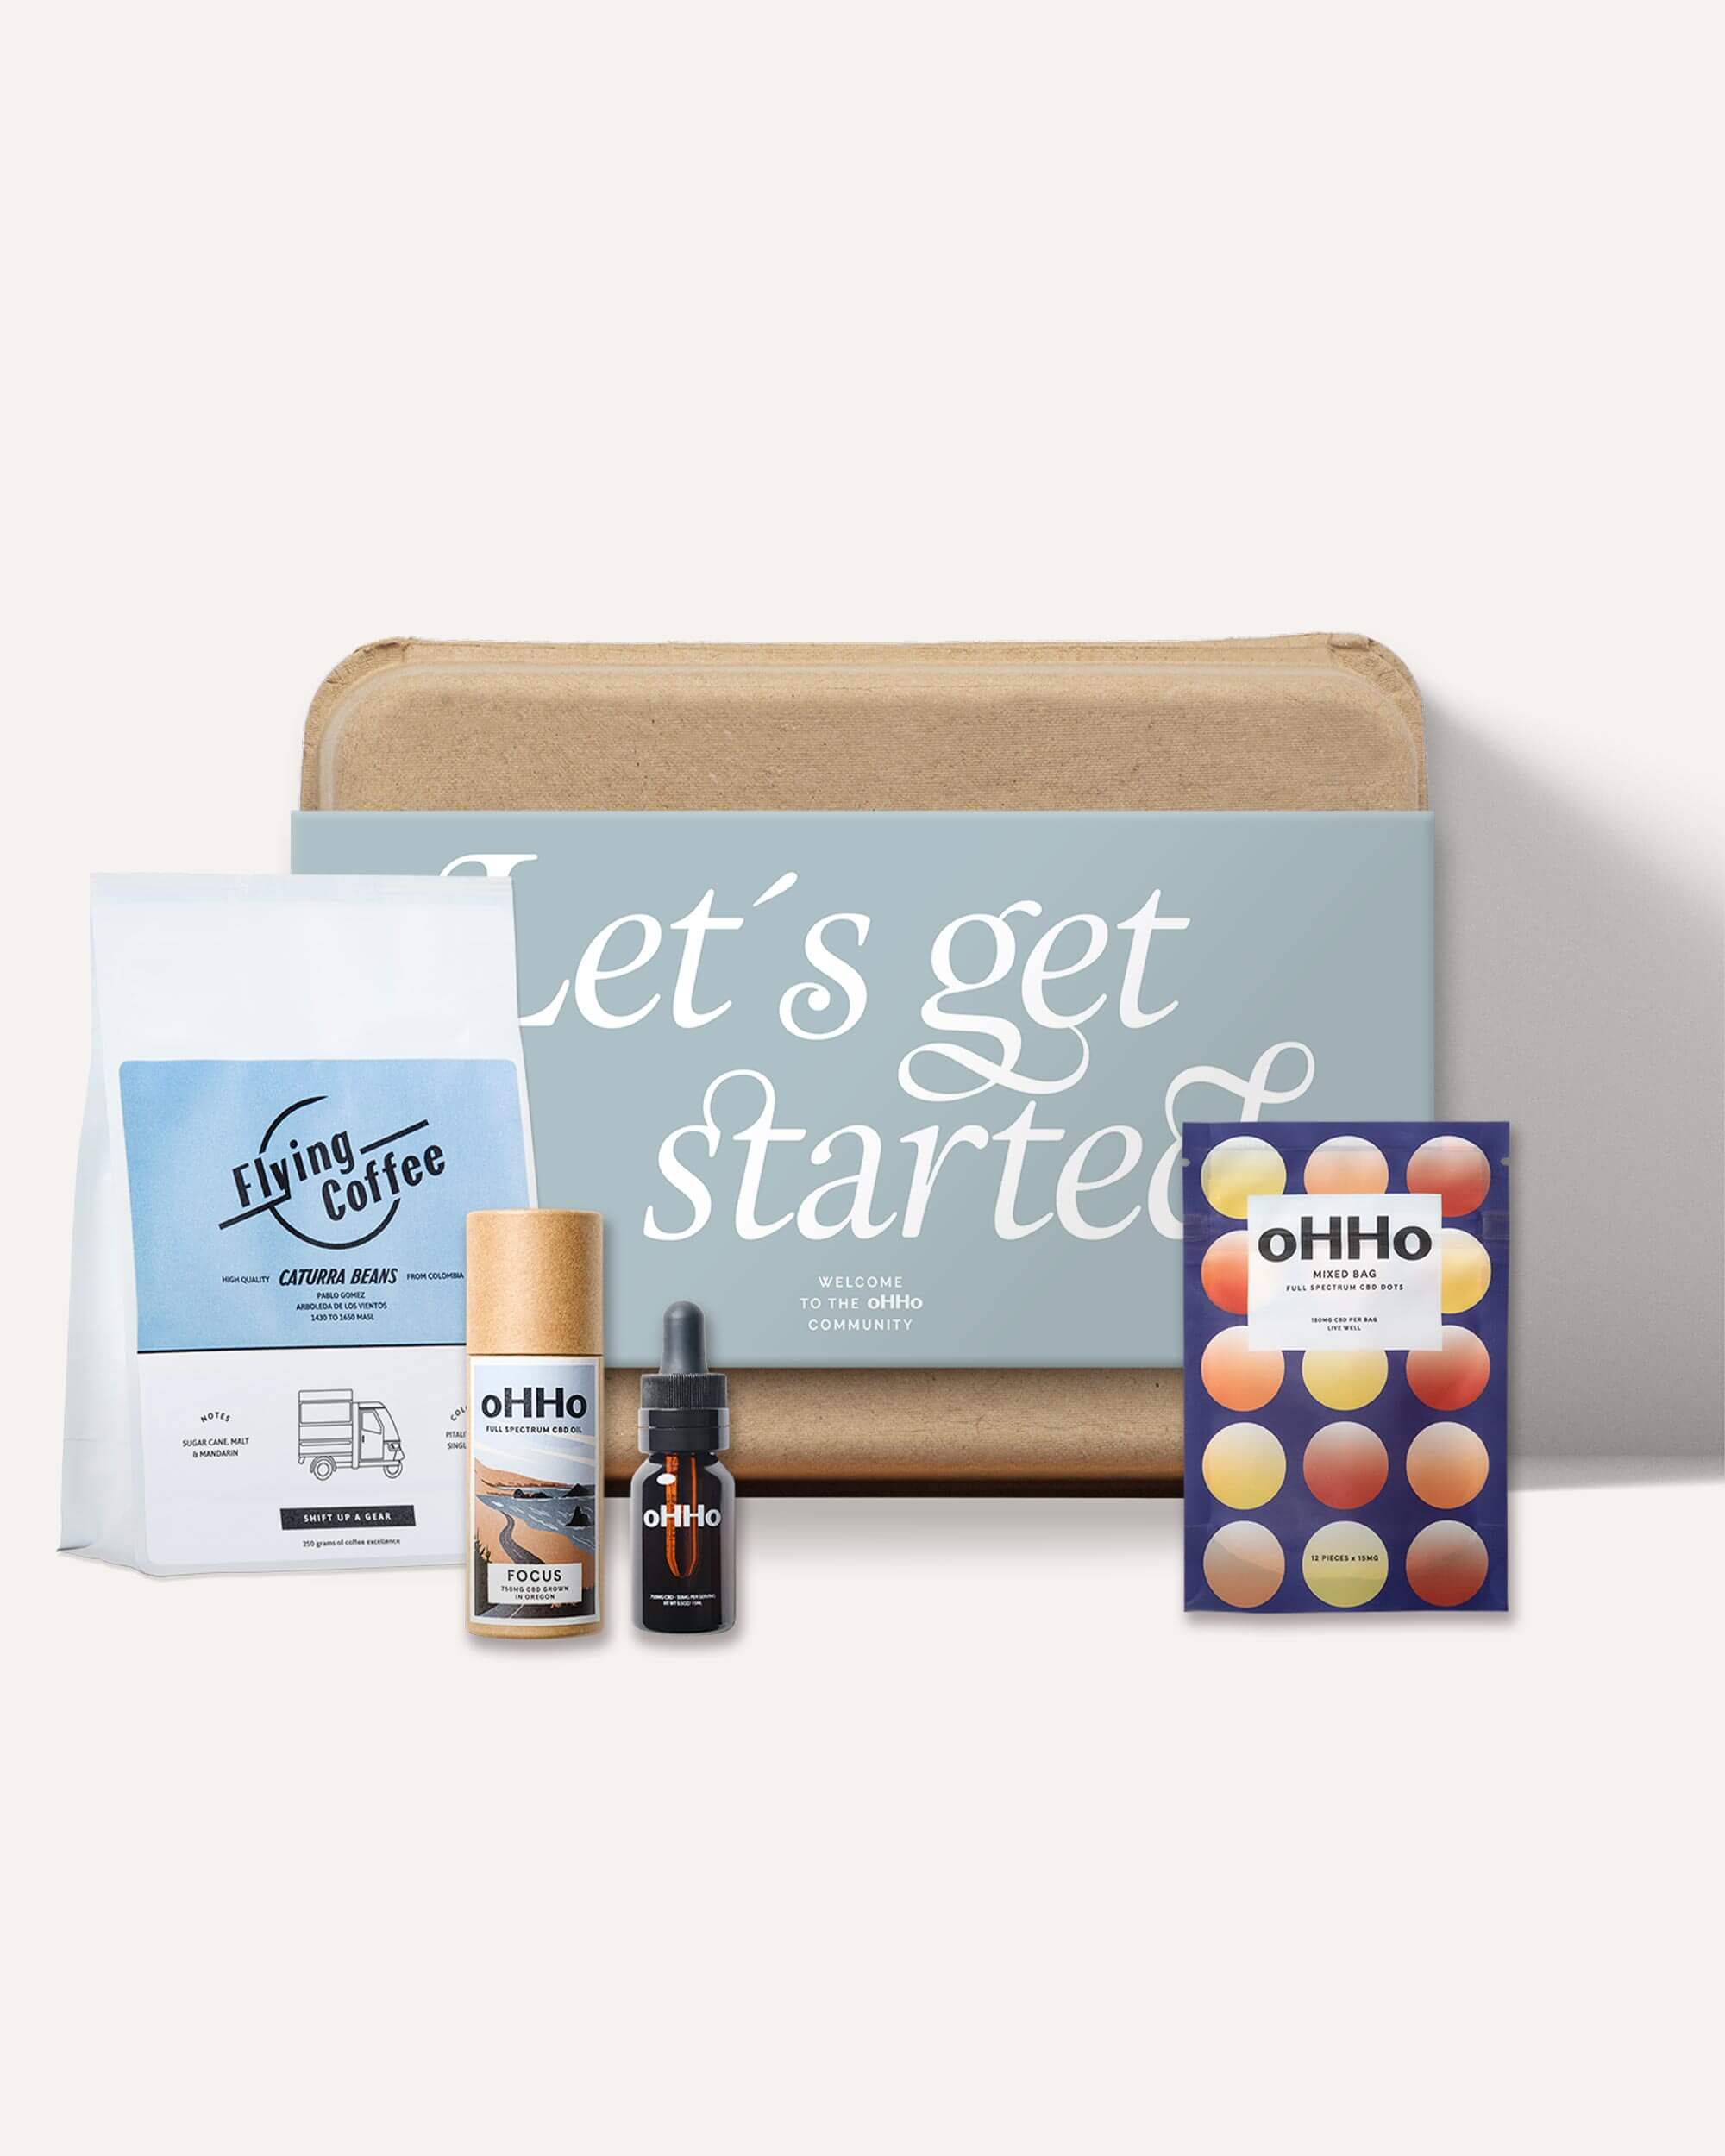 Three products that come in a pack together. Mixed pouch of dots, Focus Oil and a bag of coffee beans all in blue packaging